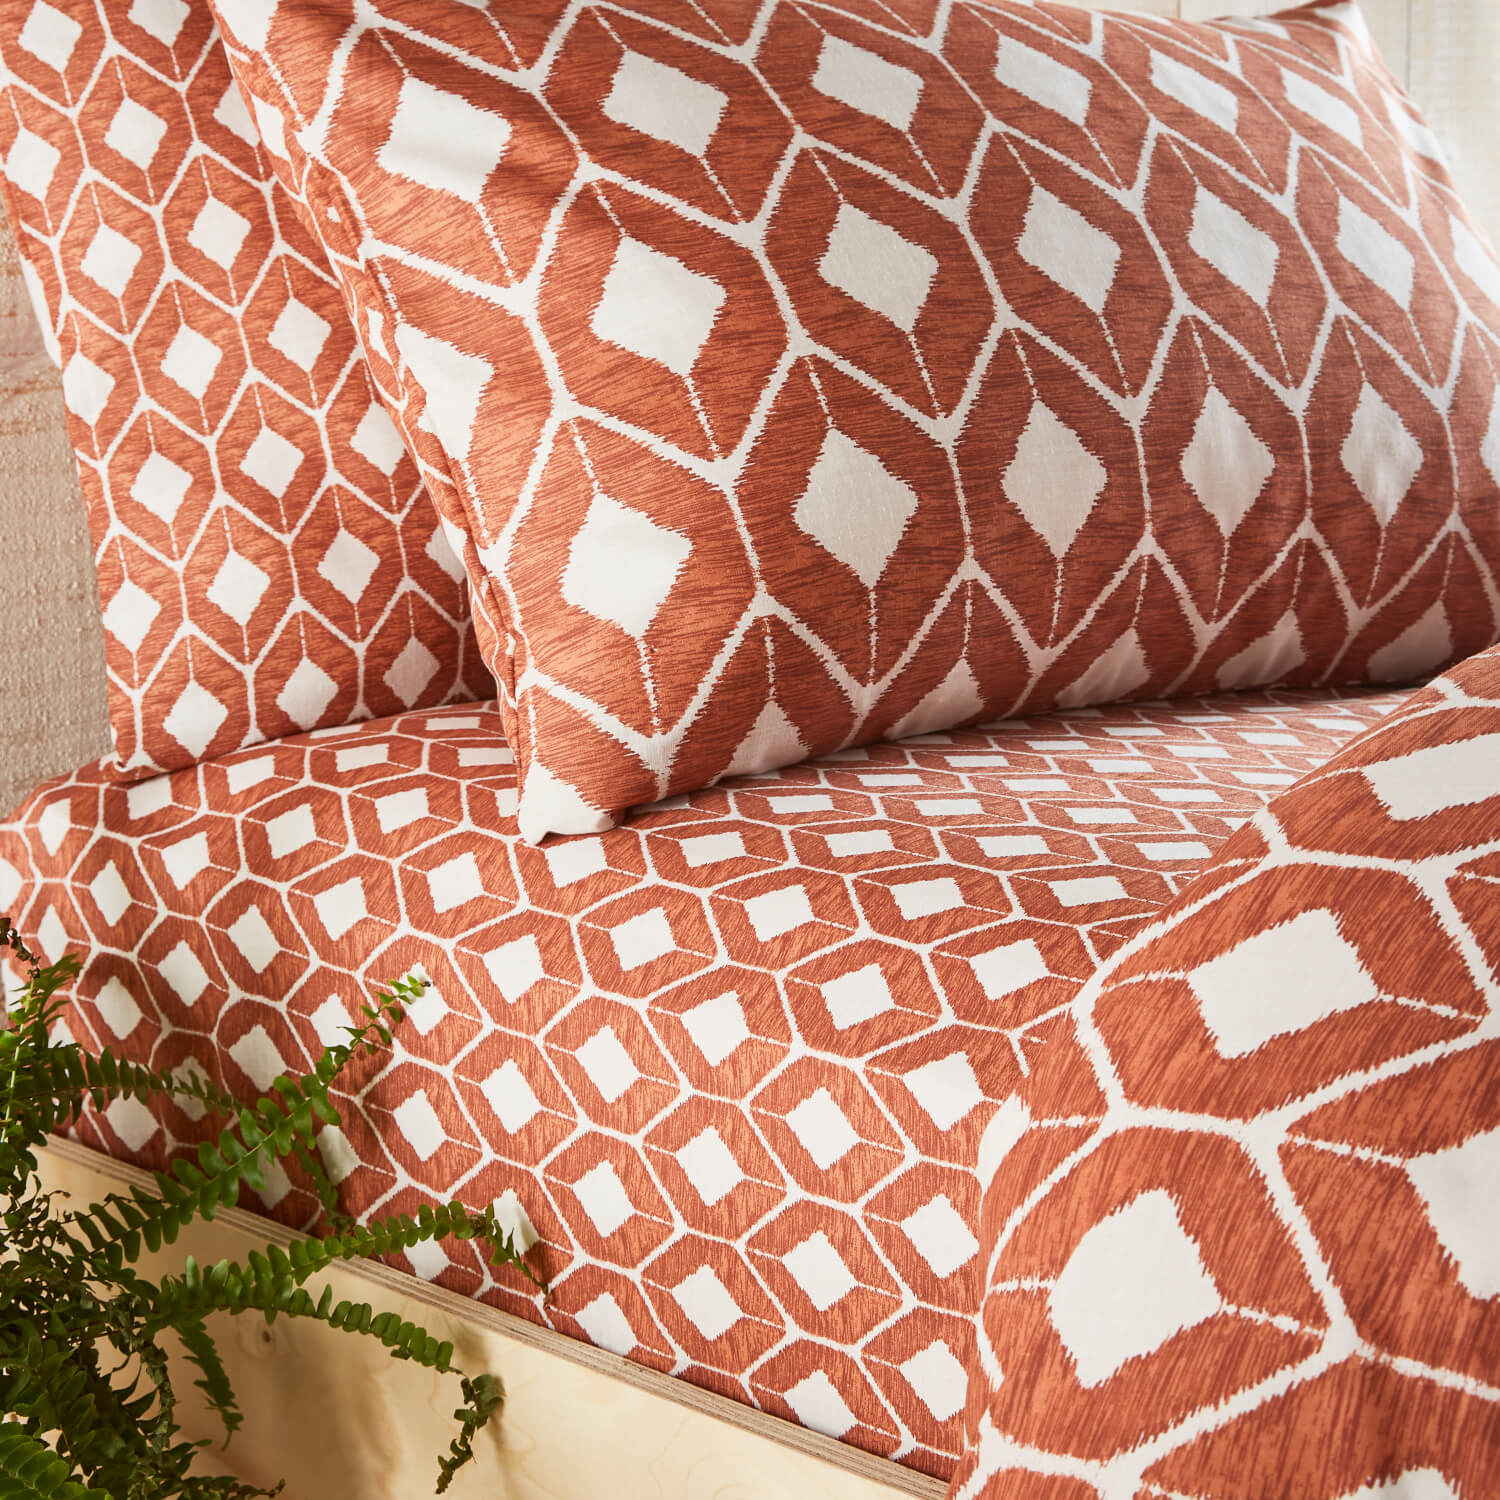 The Home Bedroom Chevron Fitted Sheet - Terracotta 1 Shaws Department Stores